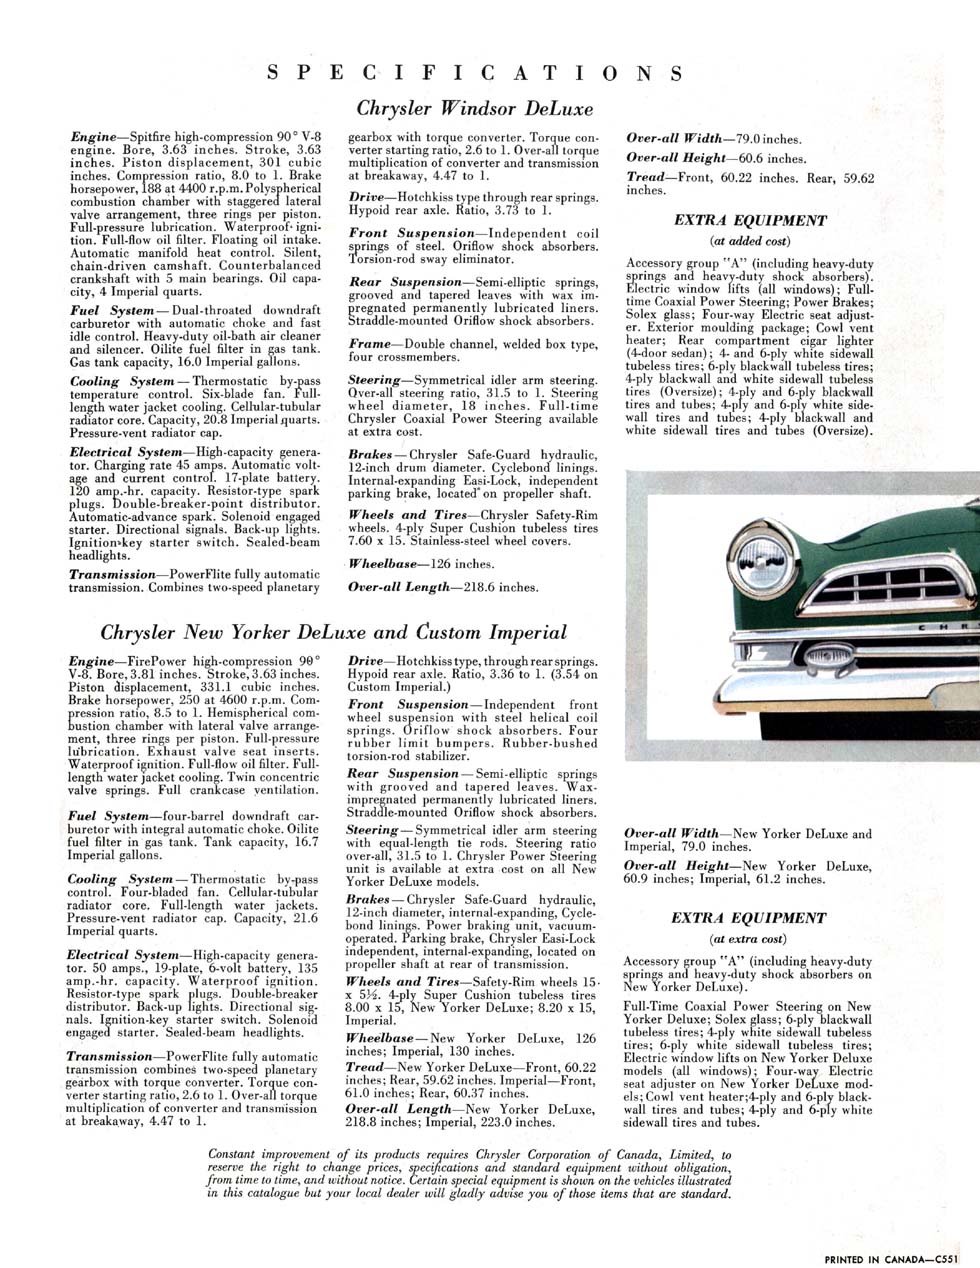 1955 Chrysler Canadian Brochure Page 3